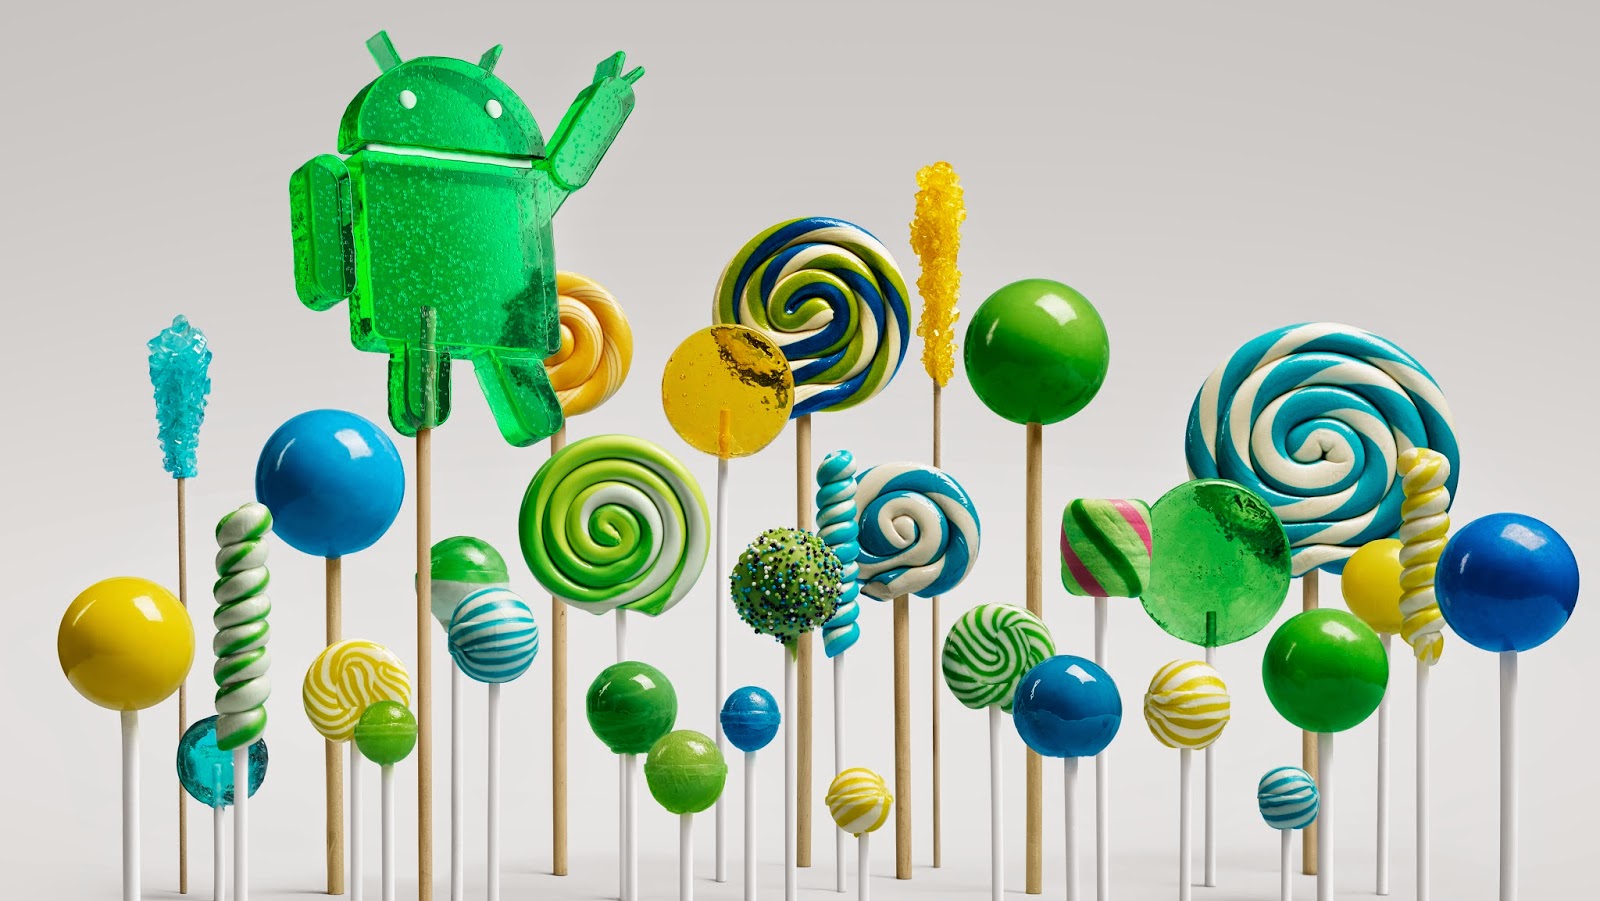 Google Releases The Next Version Of Android - Android Lollipop